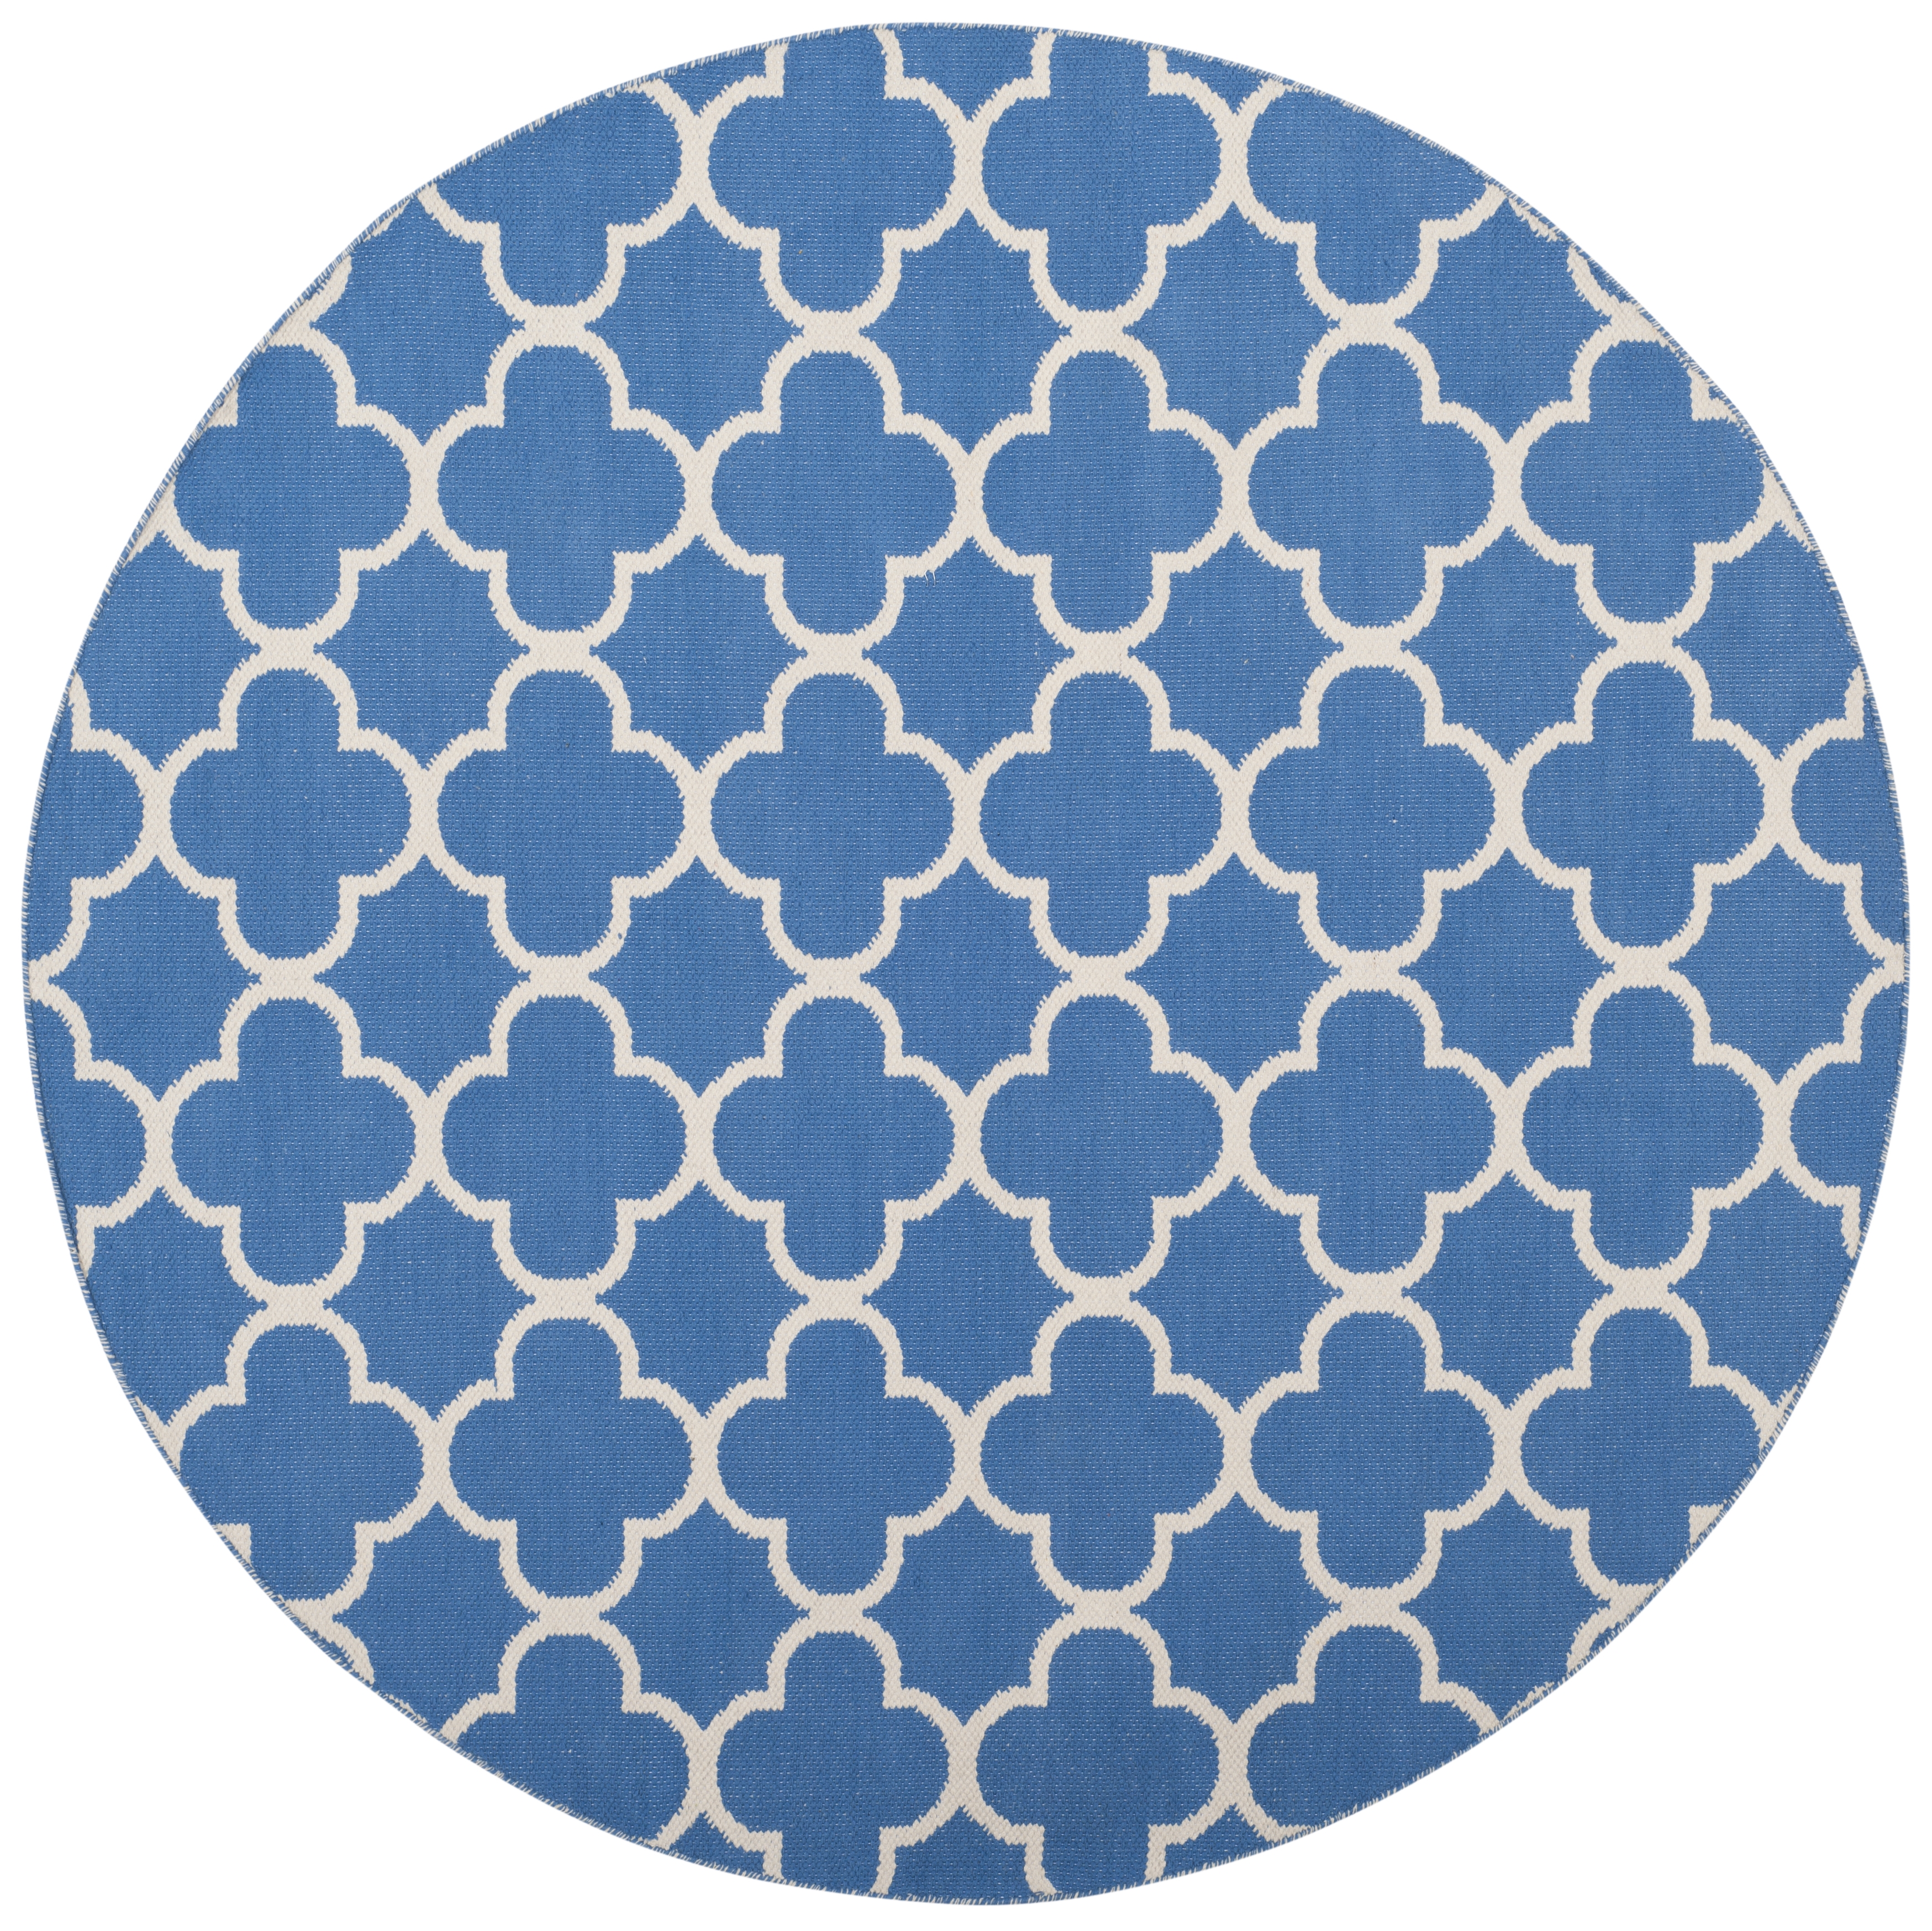 Arlo Home Hand Woven Area Rug, MTK725C, Blue/Ivory,  6' X 6' Round - Image 0